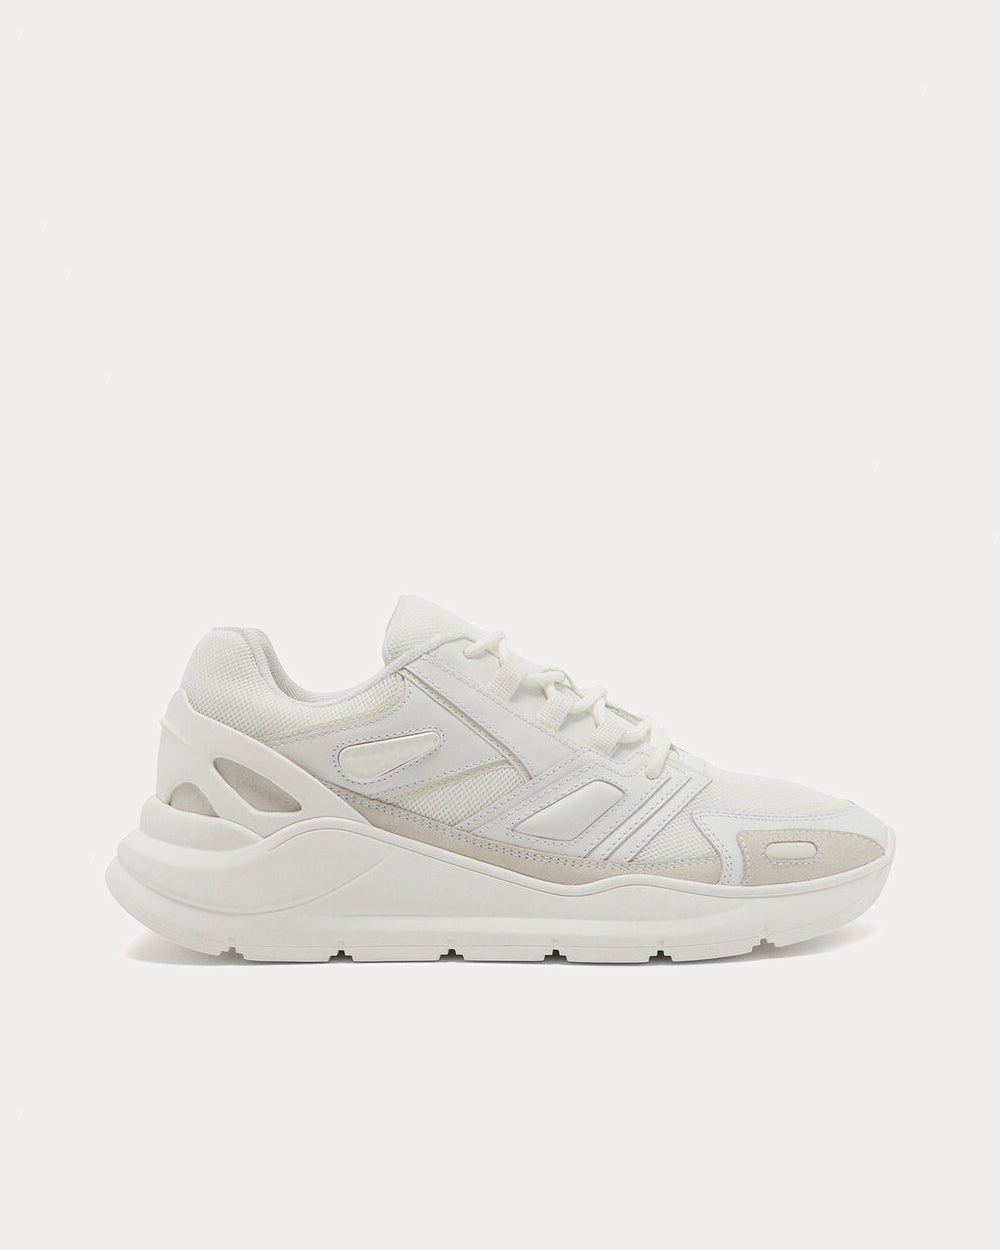 Sandro - Technical Optical White Low Top Sneakers